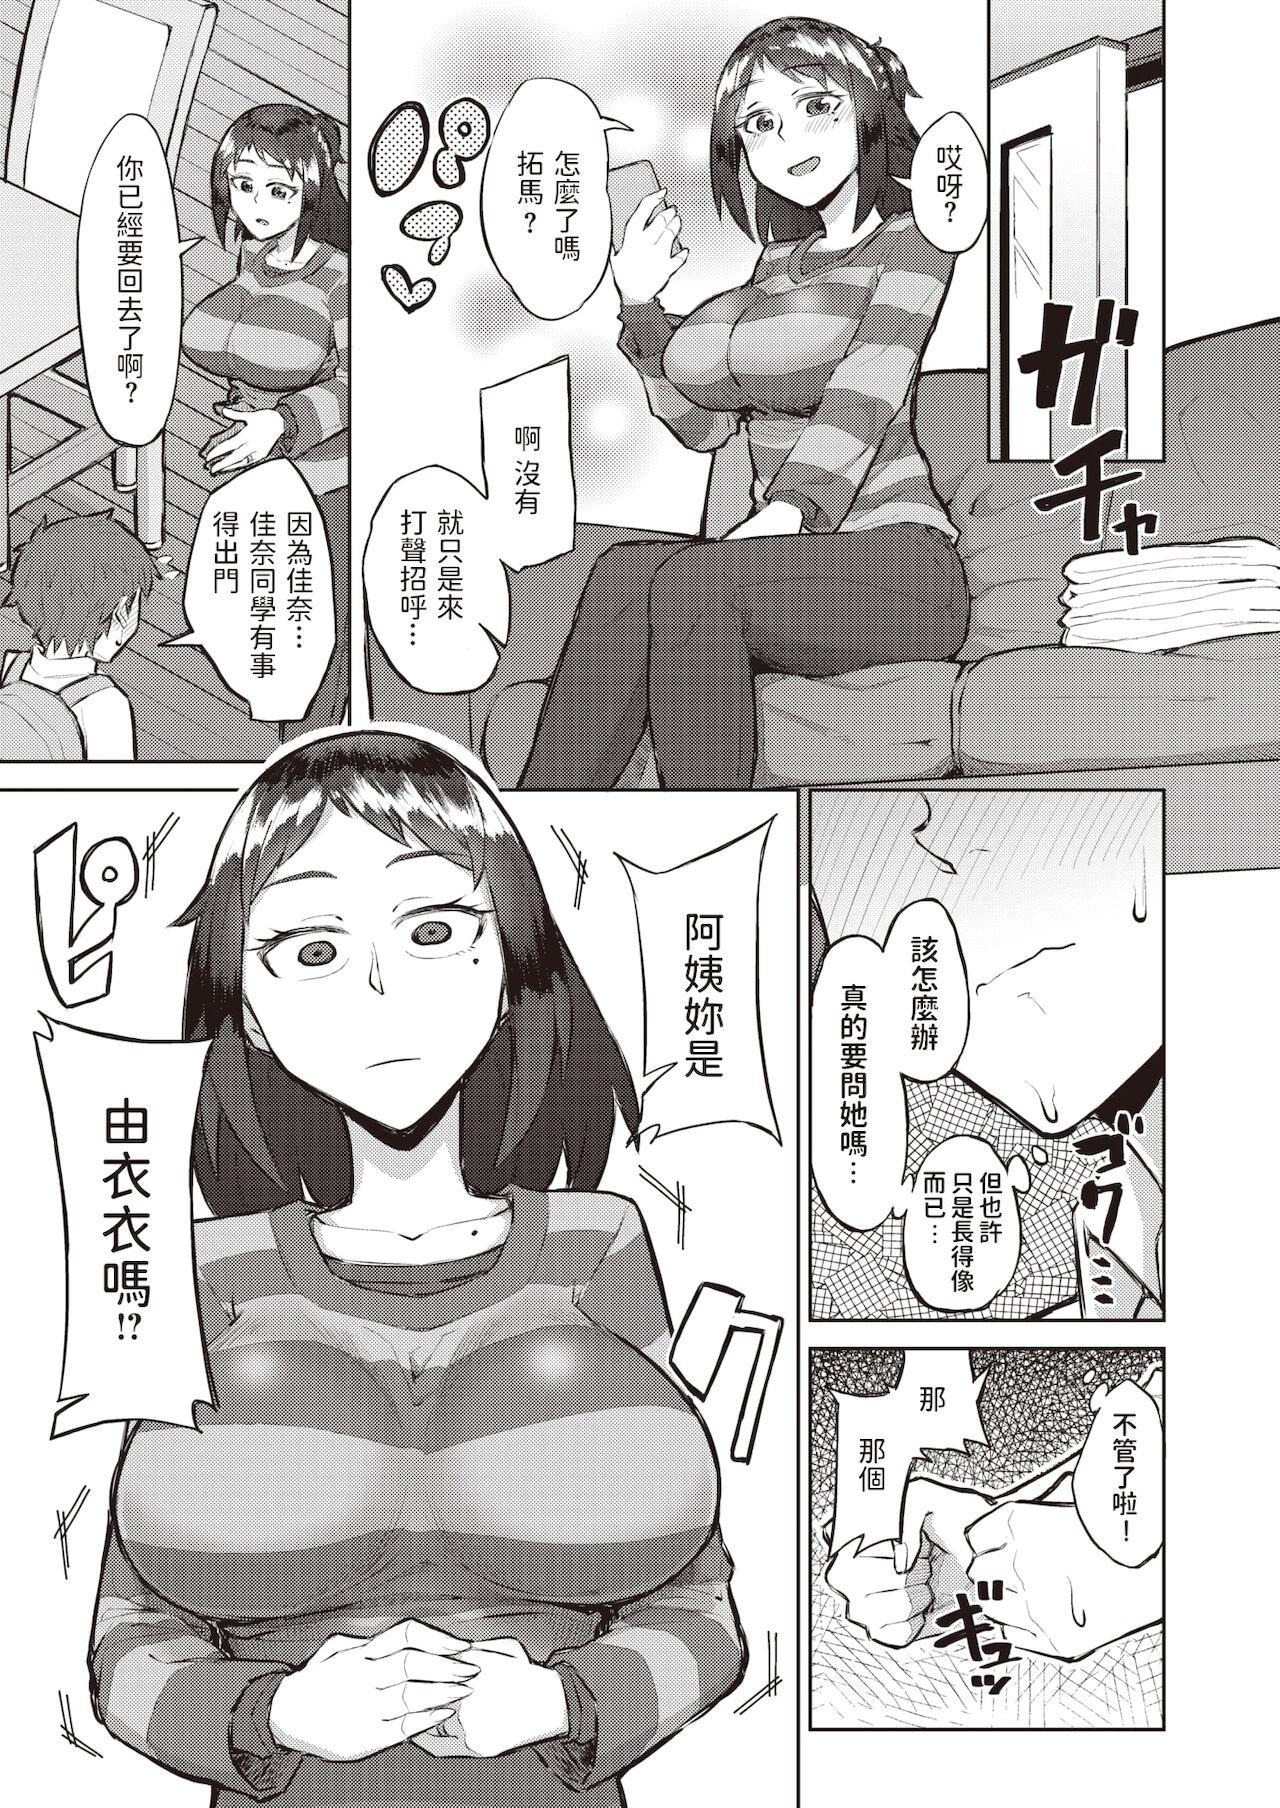 Foreplay [悪天候] るっくあっとみー (COMIC 失楽天 2019年12月号) 中文翻譯 Twink - Page 5